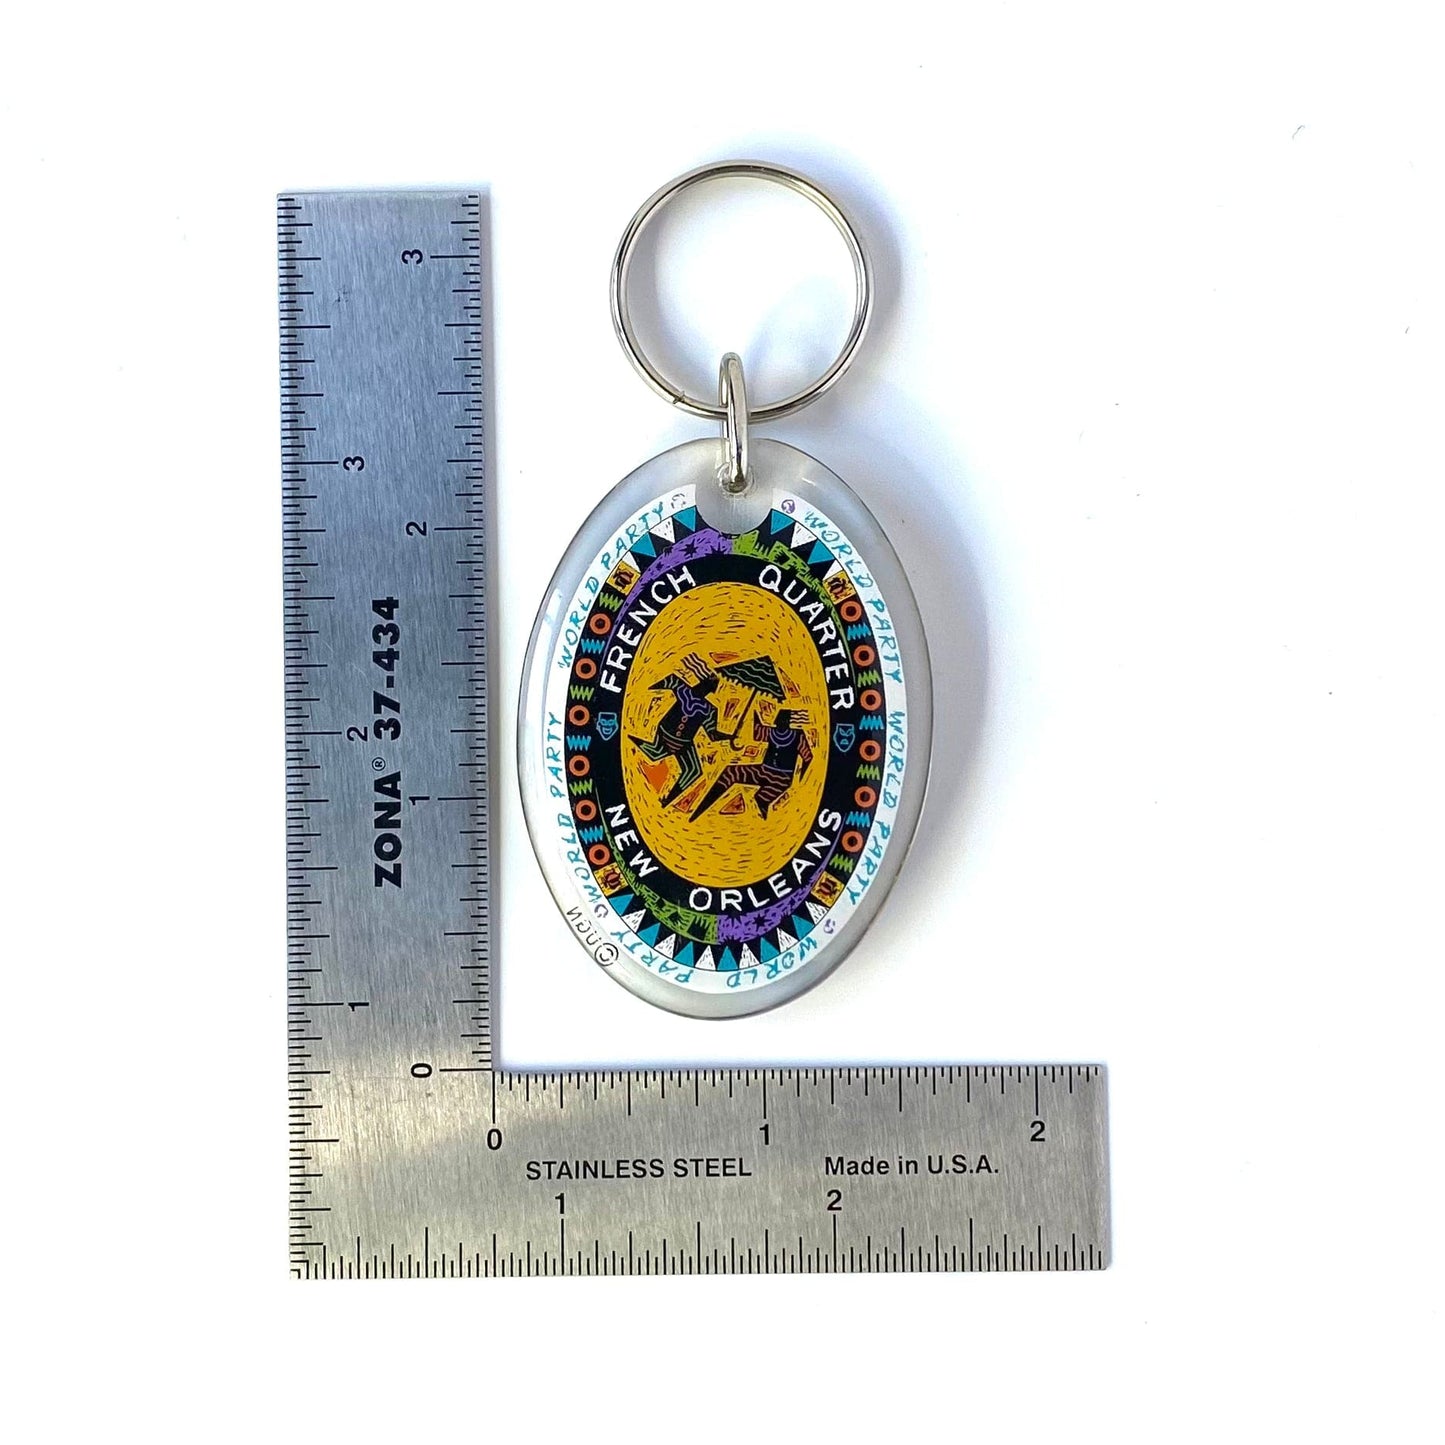 “French Quarter New Orleans World Party” Travel Souvenir Keychain Key Ring Oval Clear Acrylic